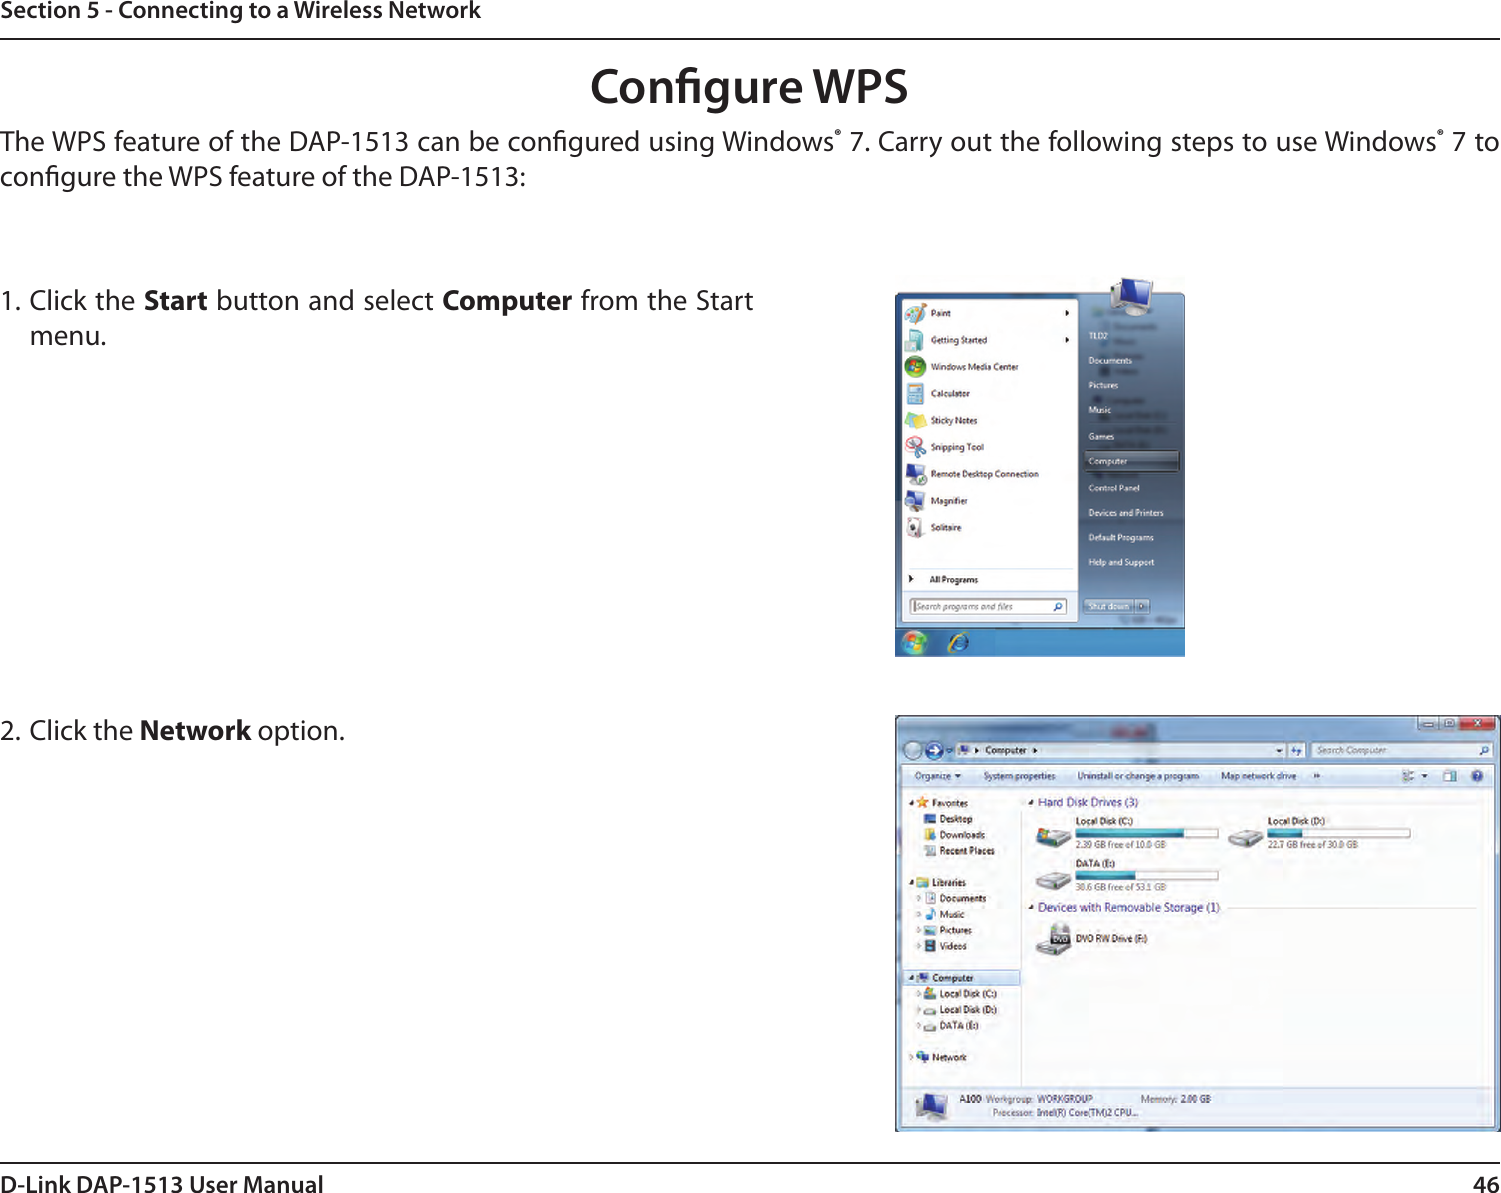 46D-Link DAP-1513 User ManualSection 5 - Connecting to a Wireless NetworkCongure WPSThe WPS feature of the DAP-1513 can be congured using Windows® 7. Carry out the following steps to use Windows® 7 to congure the WPS feature of the DAP-1513:1. Click the Start button and select Computer from the Start menu.2. Click the Network option.